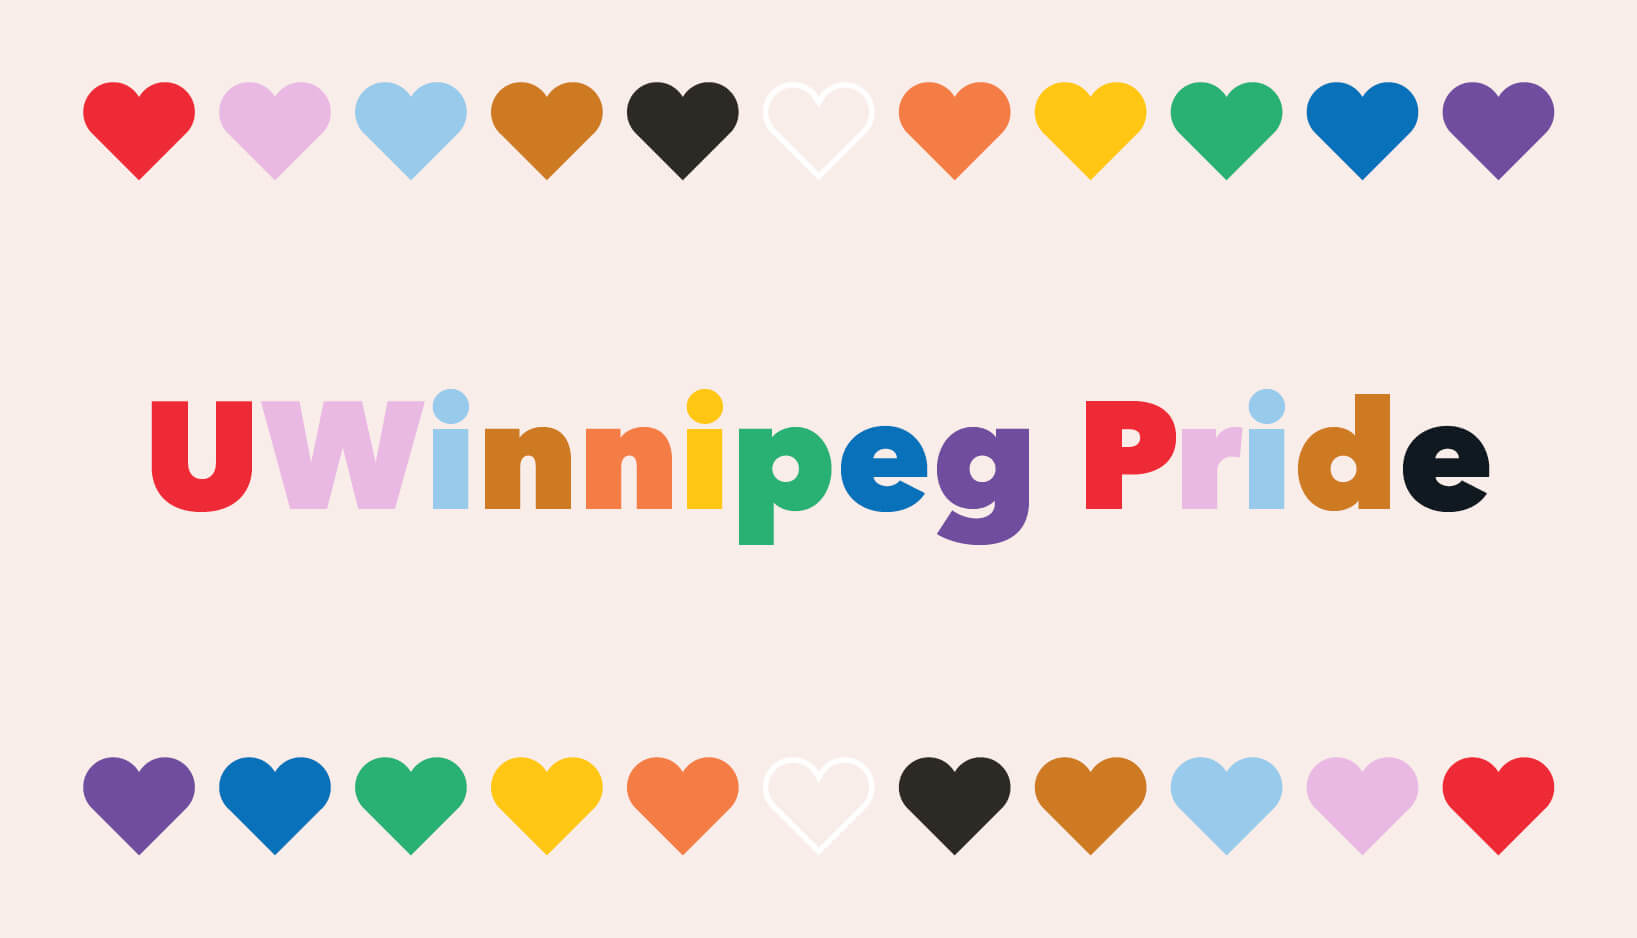 The words "UWinnipeg Pride" on a pink banner with a row of multicolour  hearts above and below